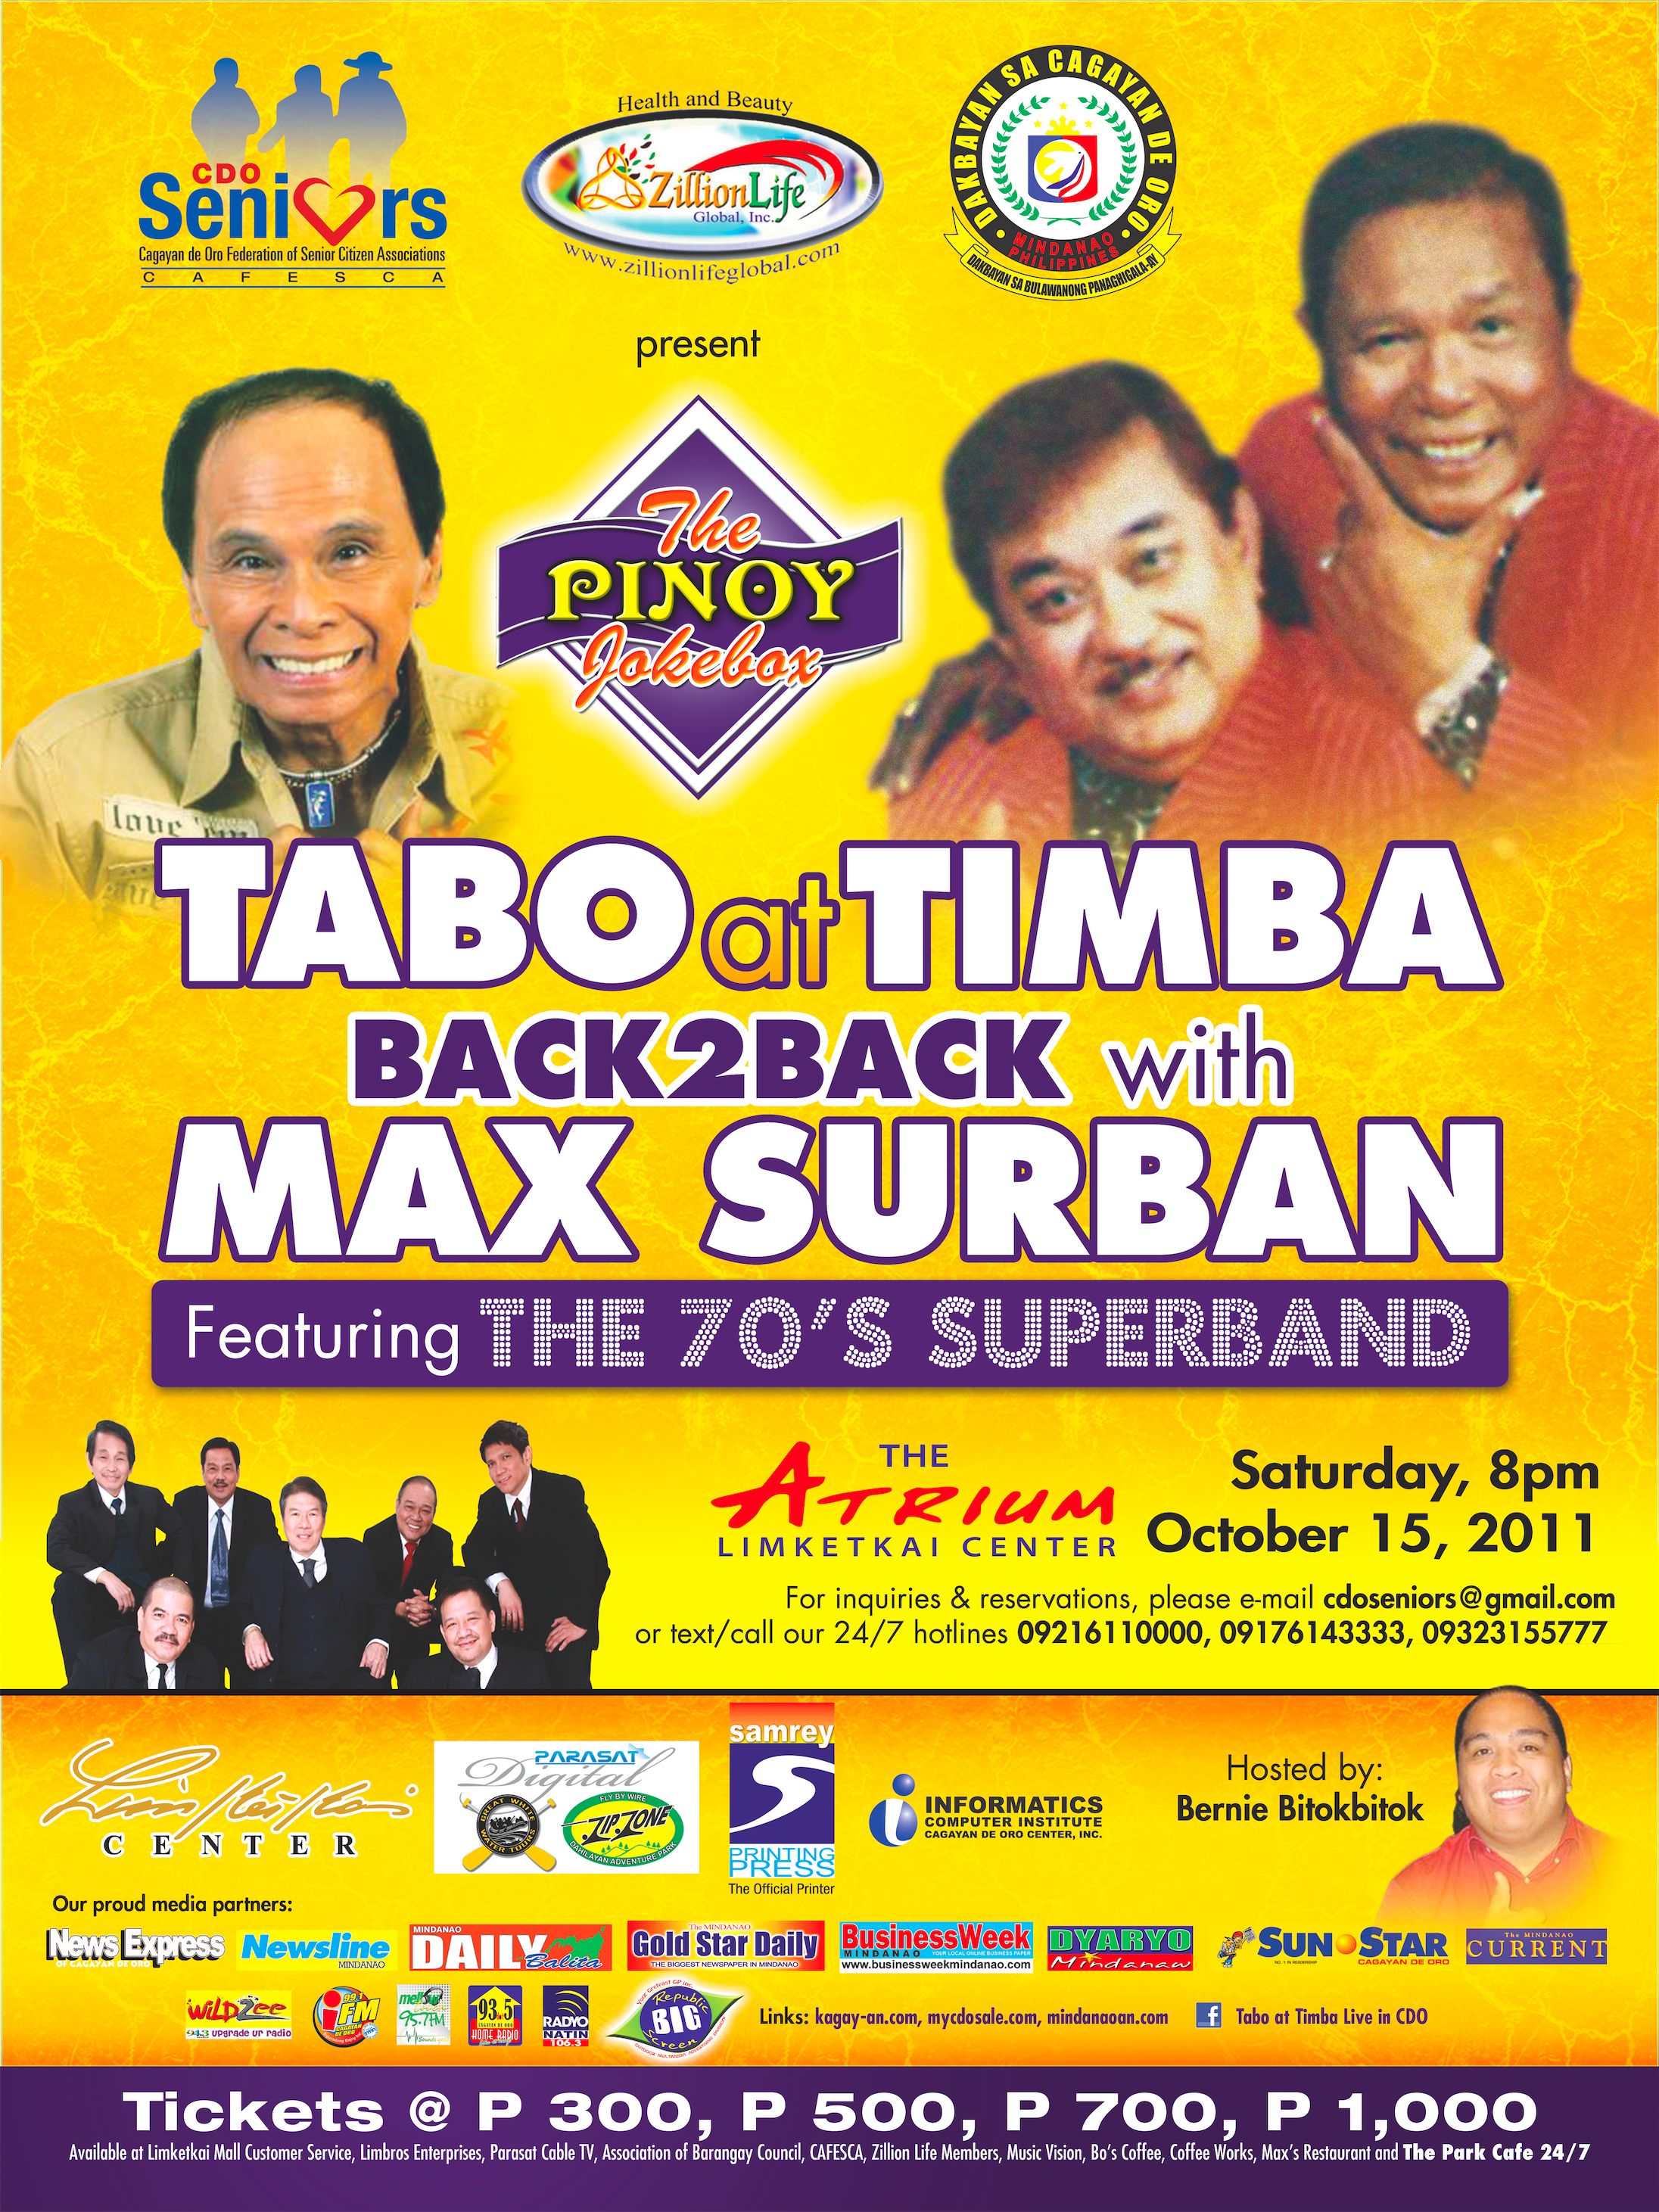 UPDATED: Tabo at Timba and Max Surban featuring the 70’s Superband Live in CDO this October 15, 2011!